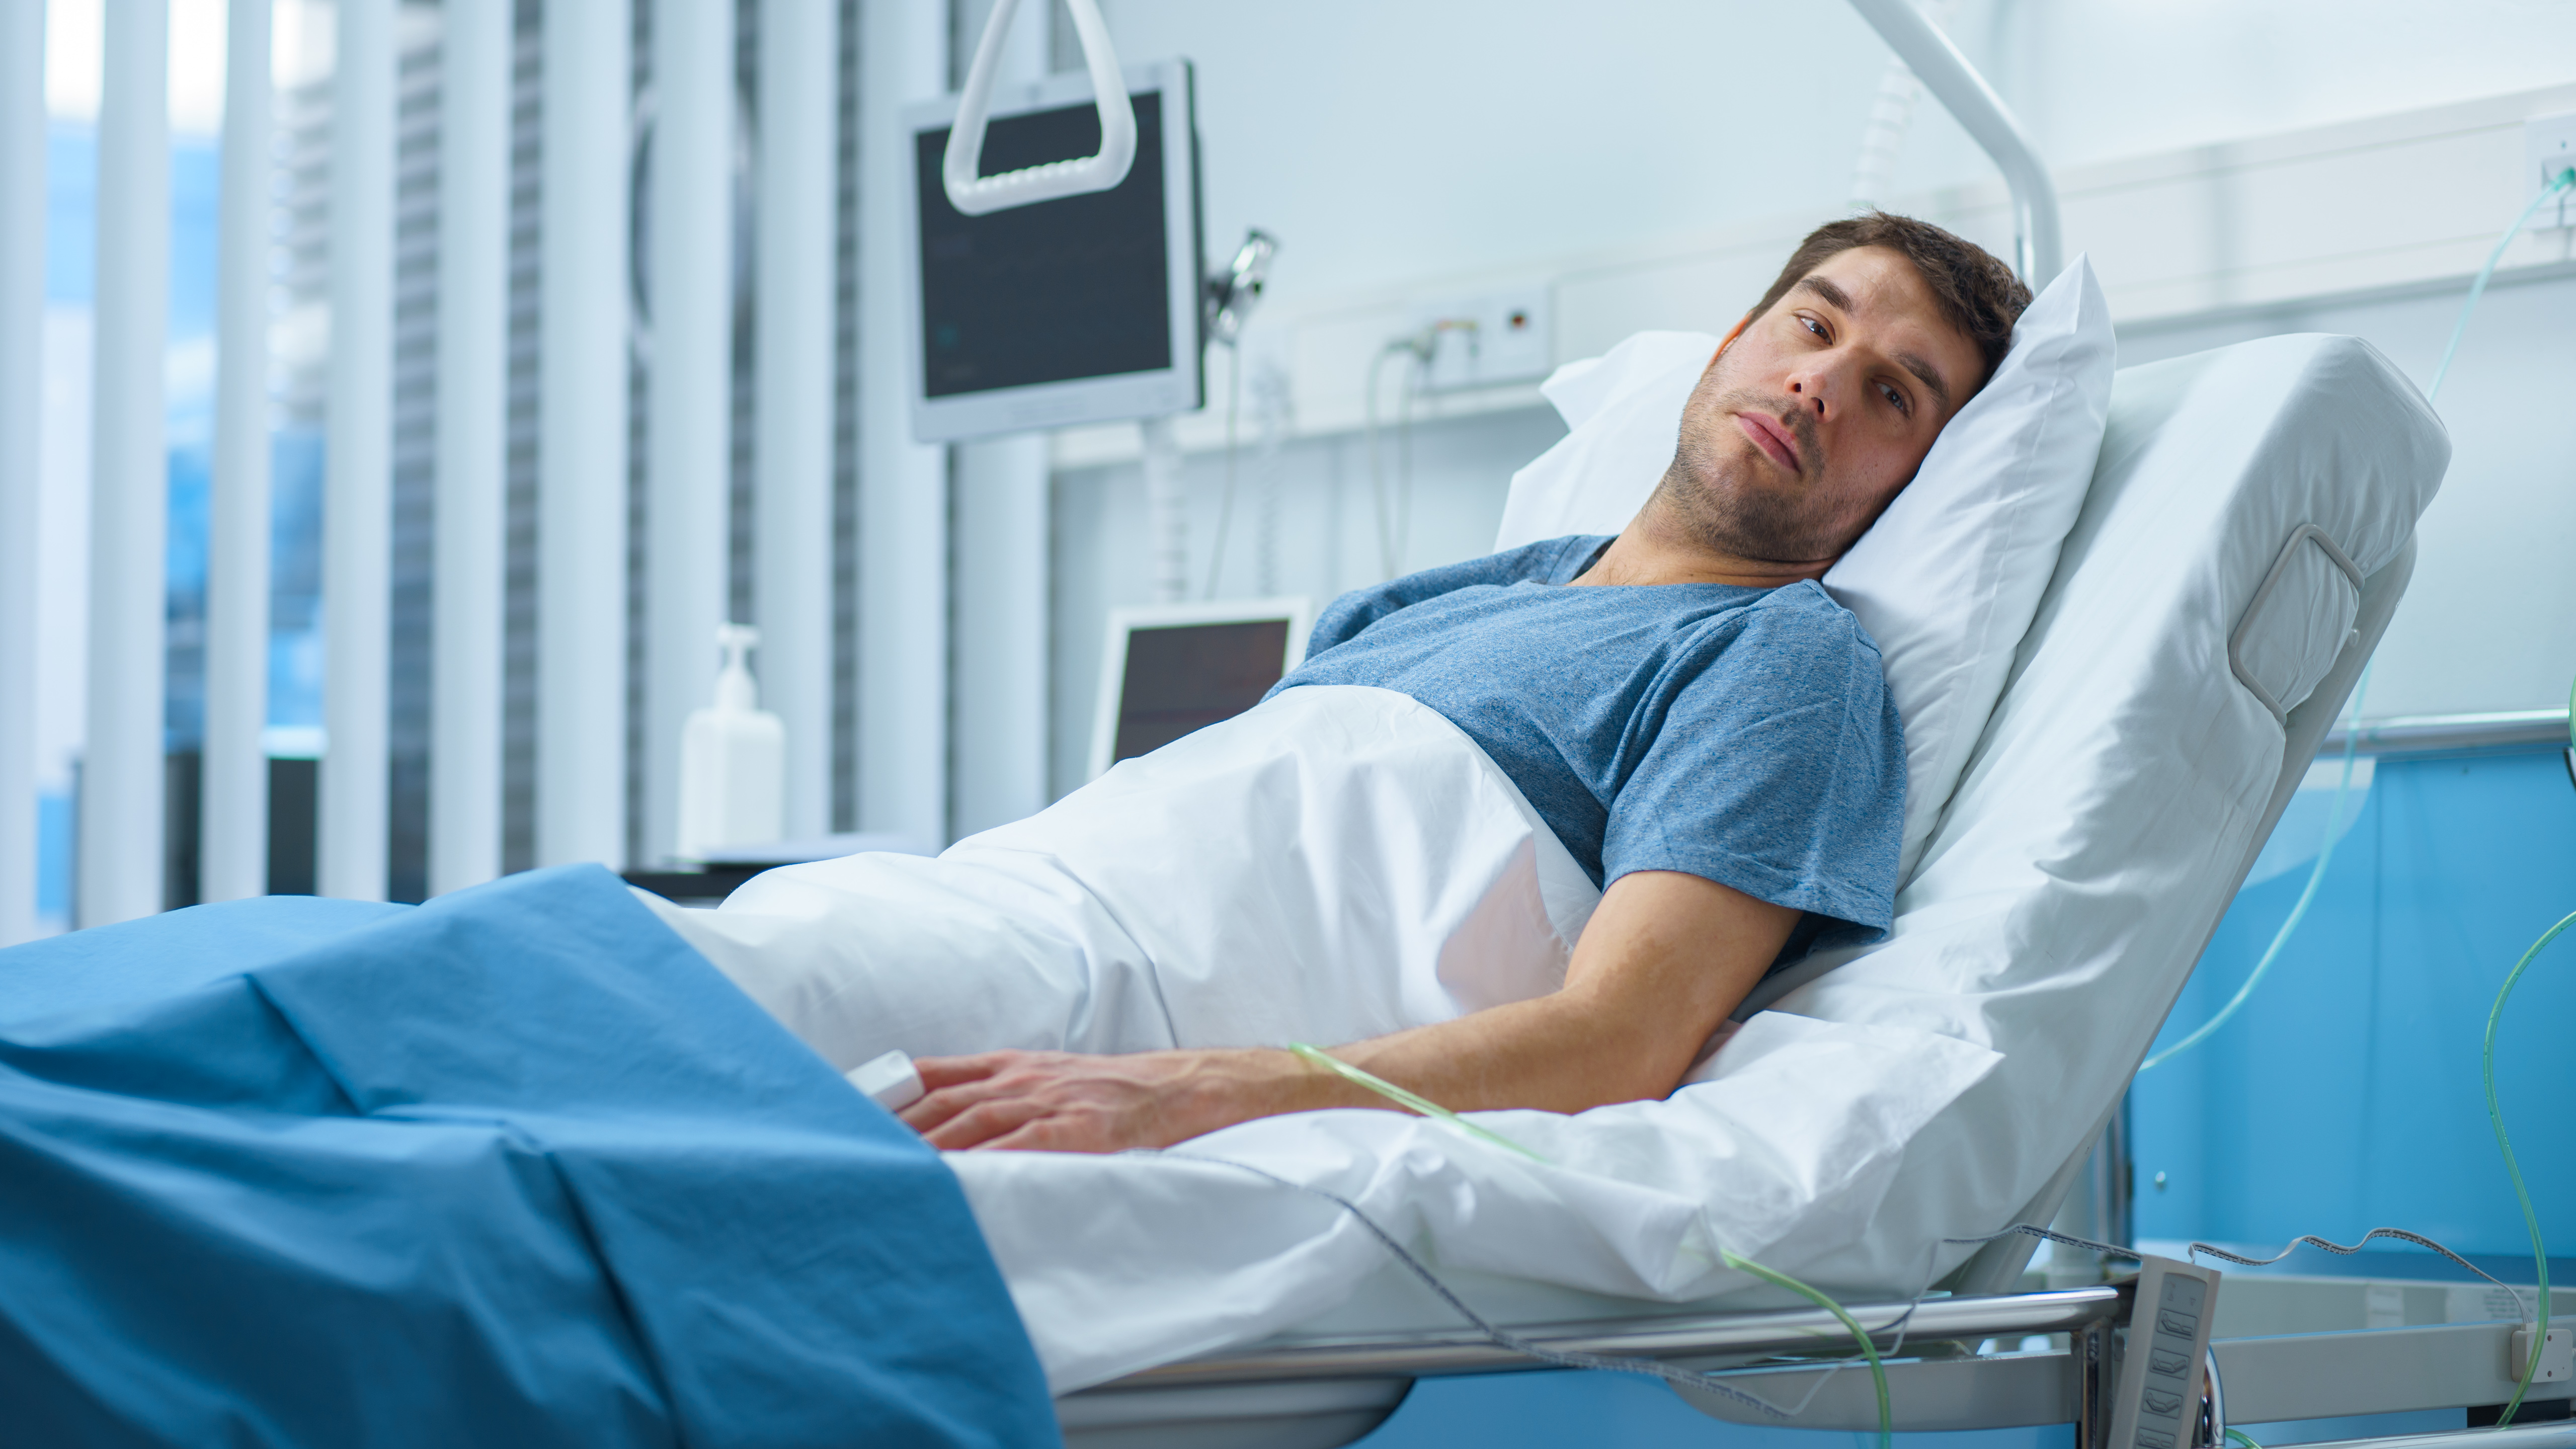 A male patient is seen lying in a hospital bed | Source: Shutterstock